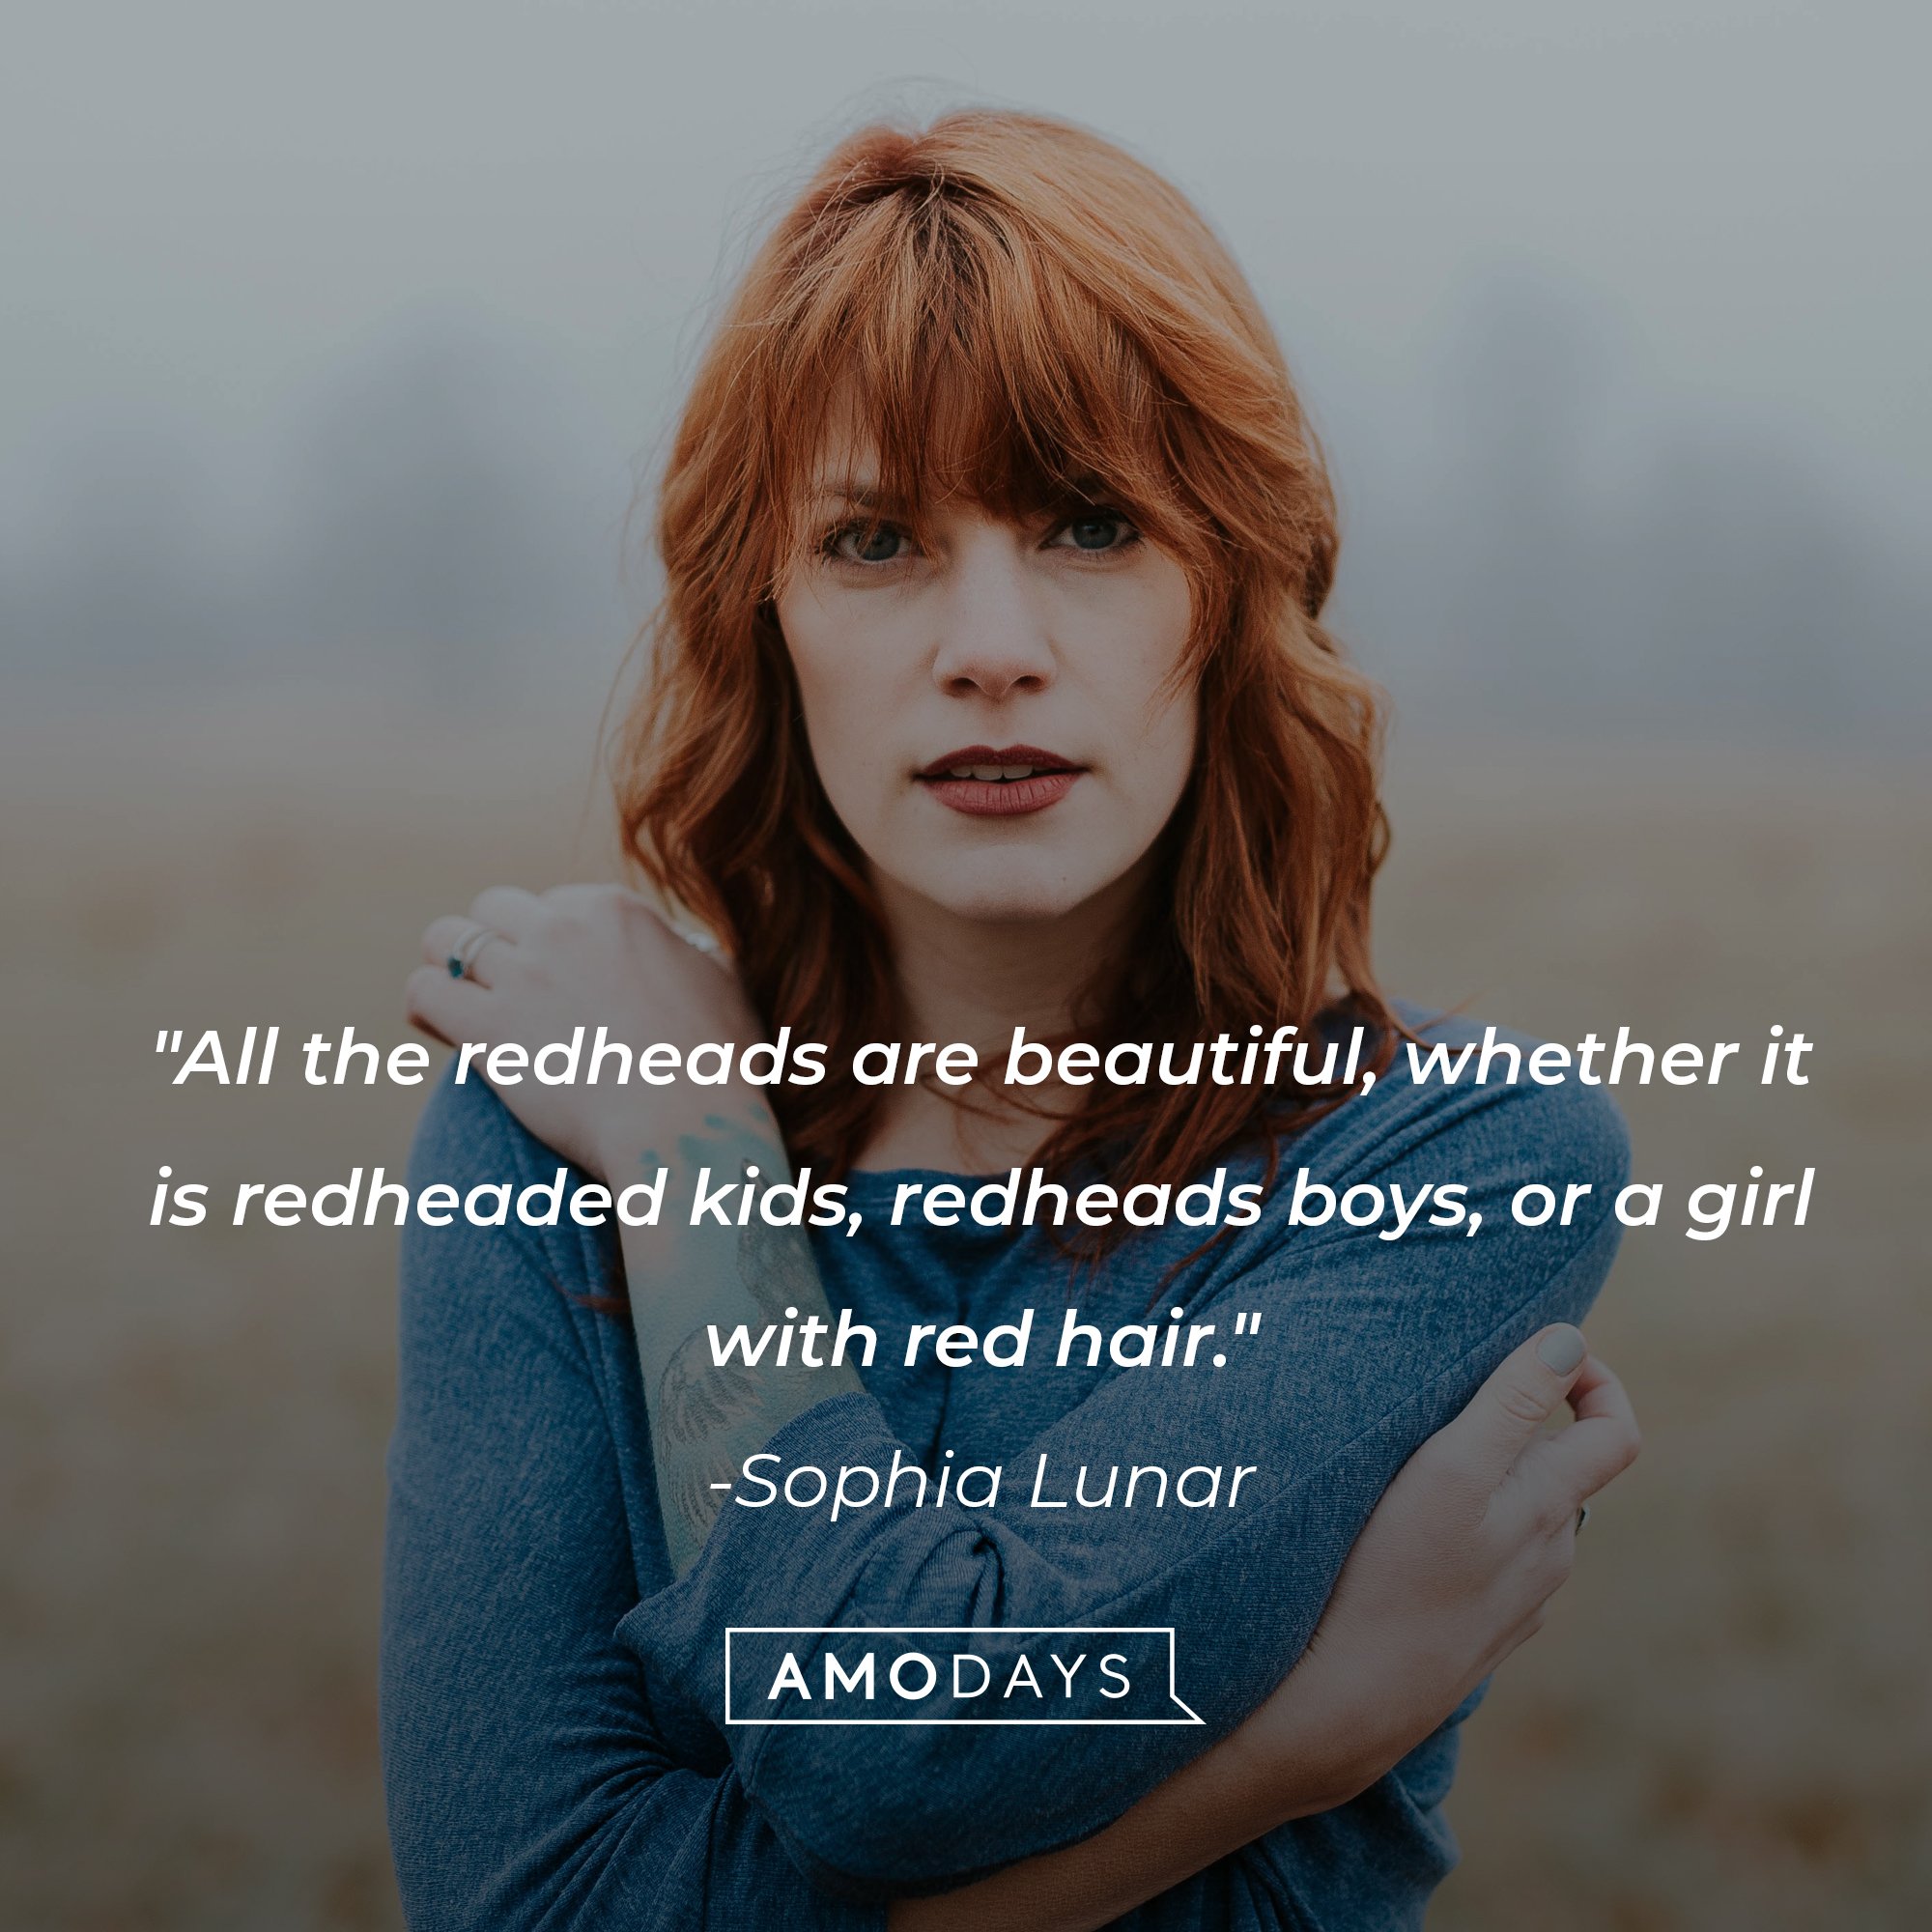 Sophia Lunar’s quote: "All the redheads are beautiful, whether it is redheaded kids, redheads boys, or a girl with red hair." | Image: AmoDays